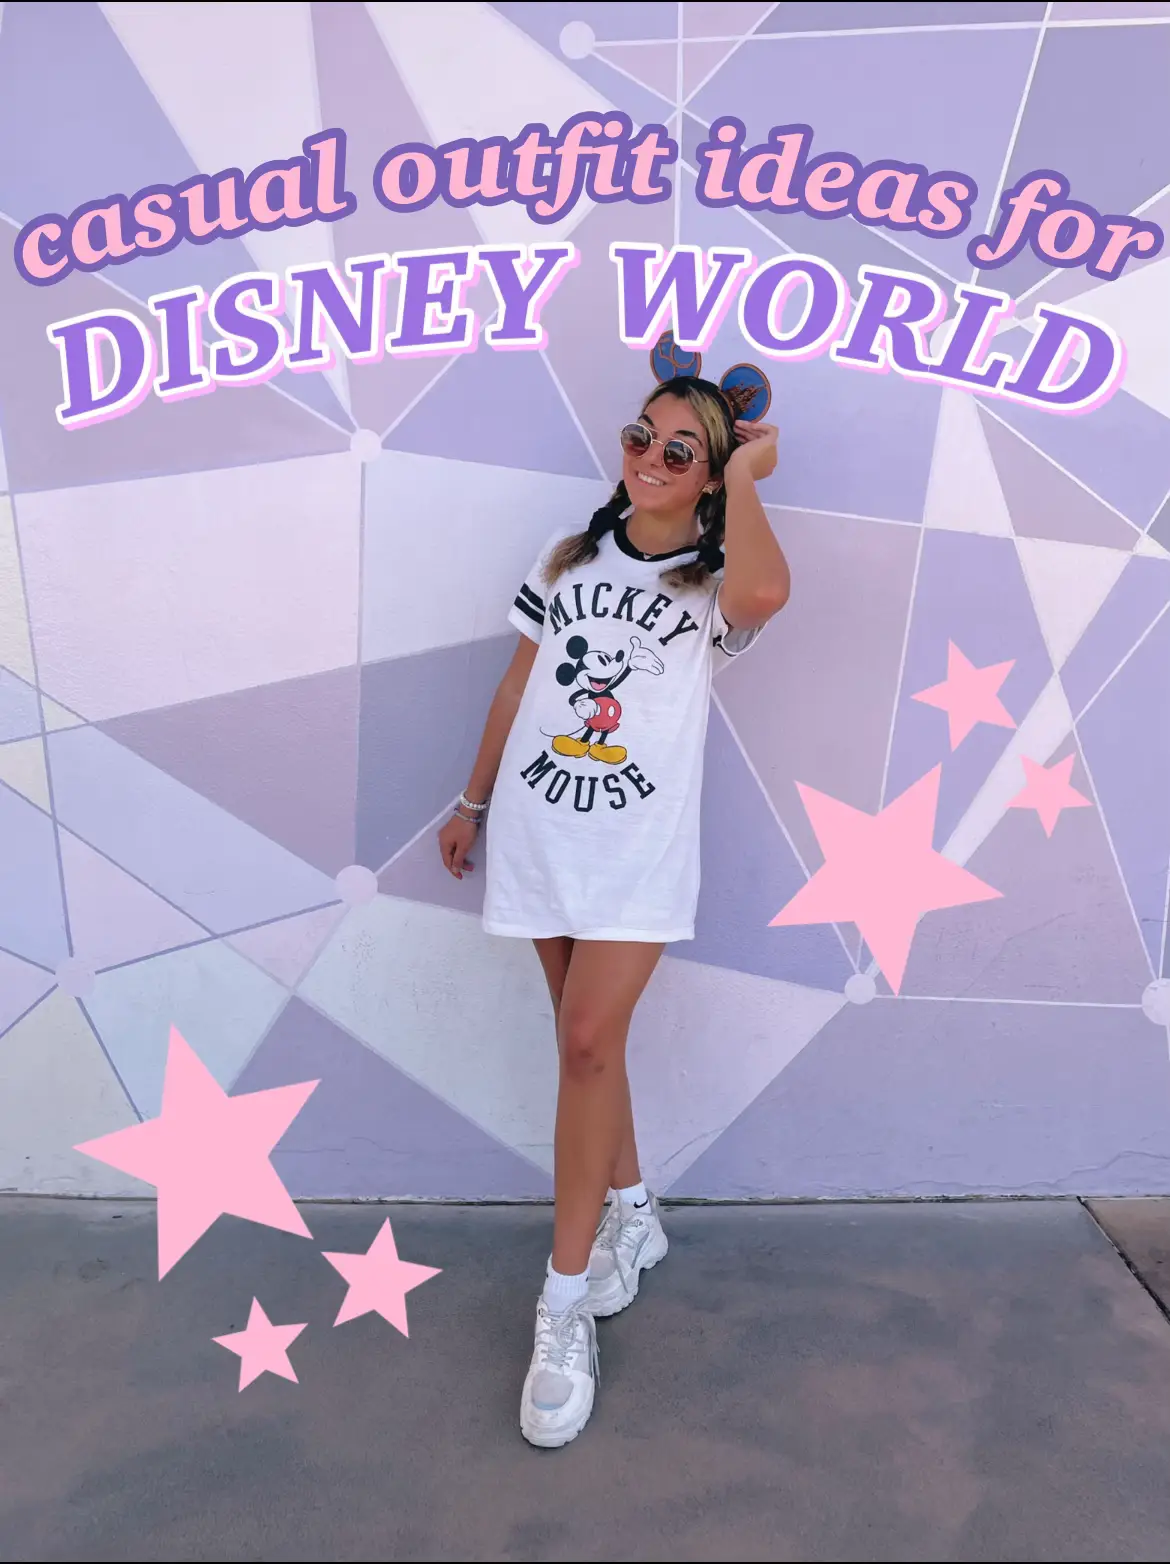 Outfit idea for Disneyland 🐭✨, Gallery posted by Nancy Navarro